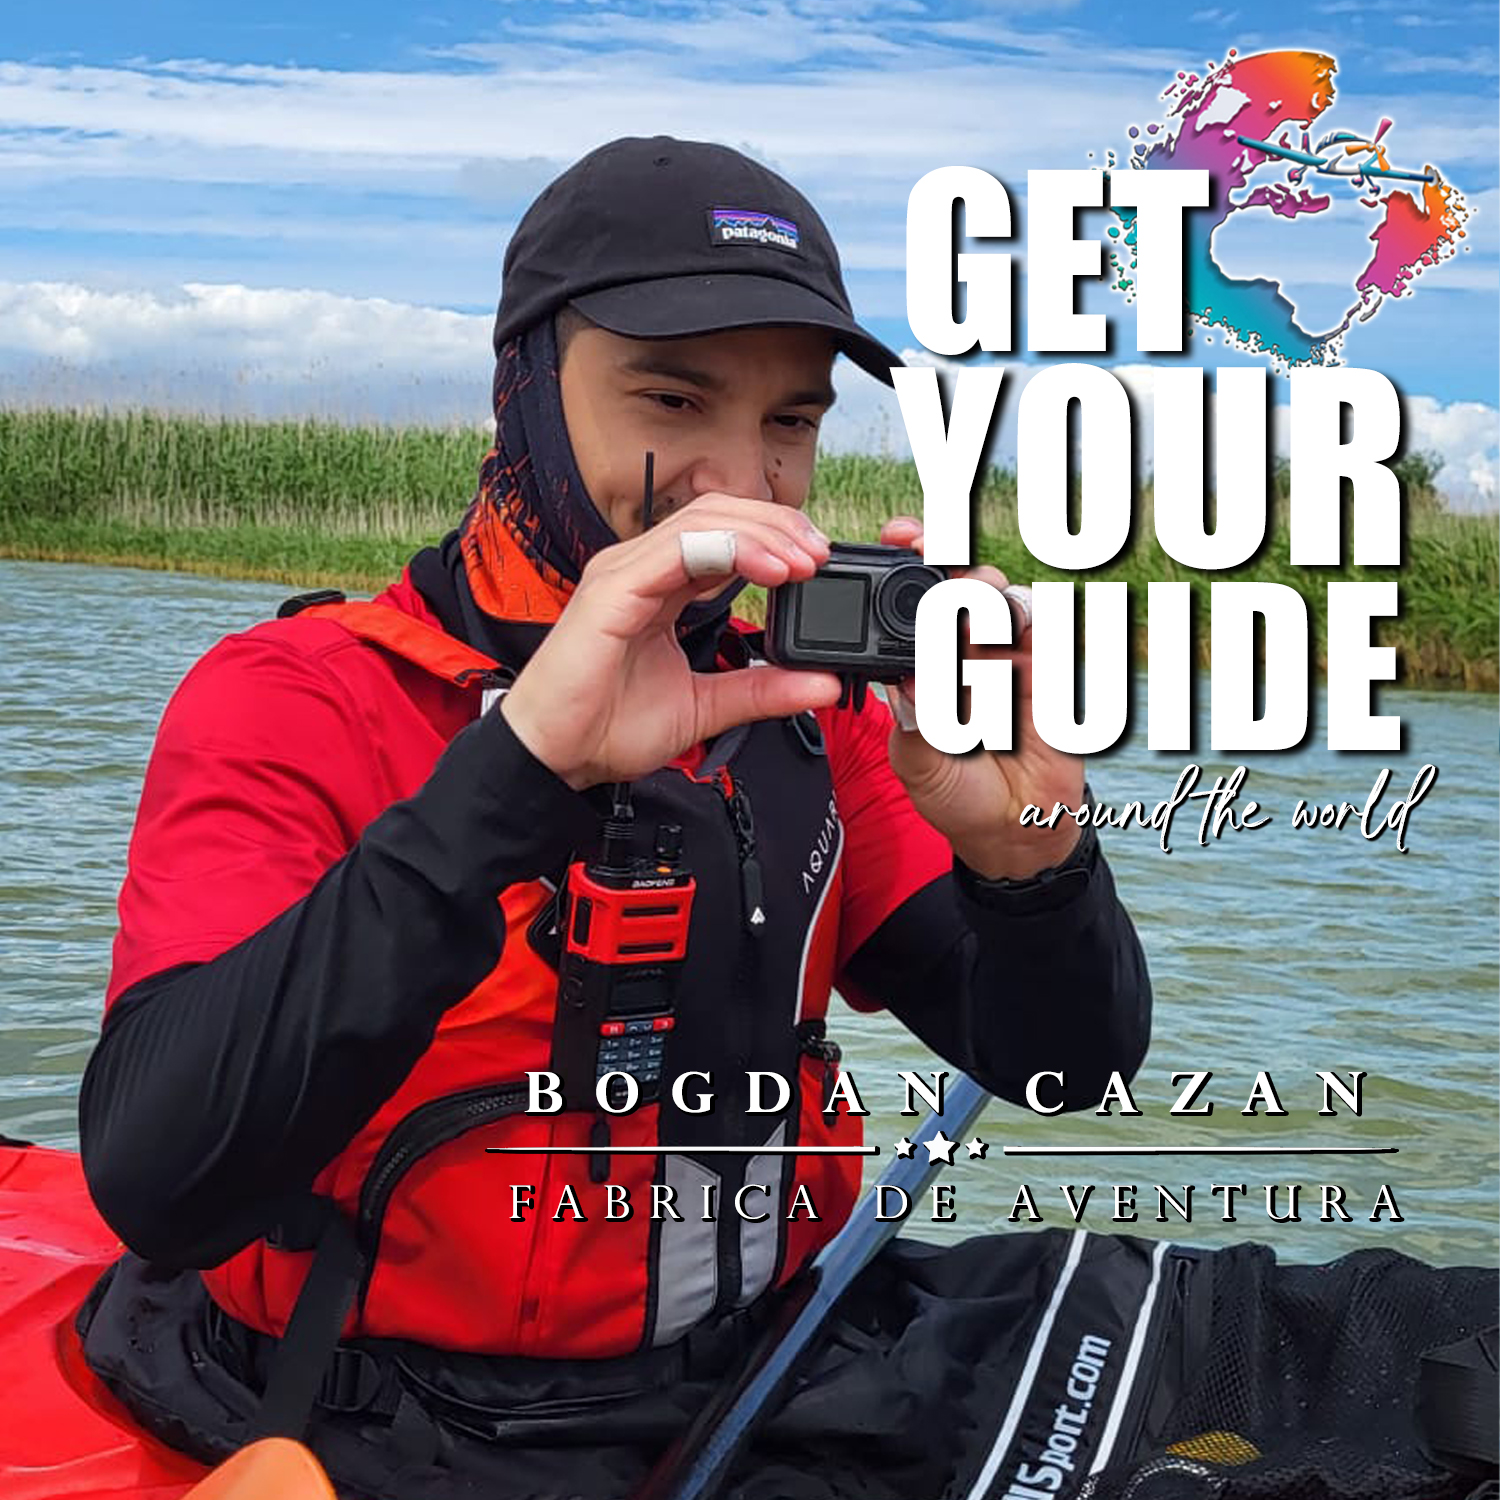 get_your_guide-florin copy